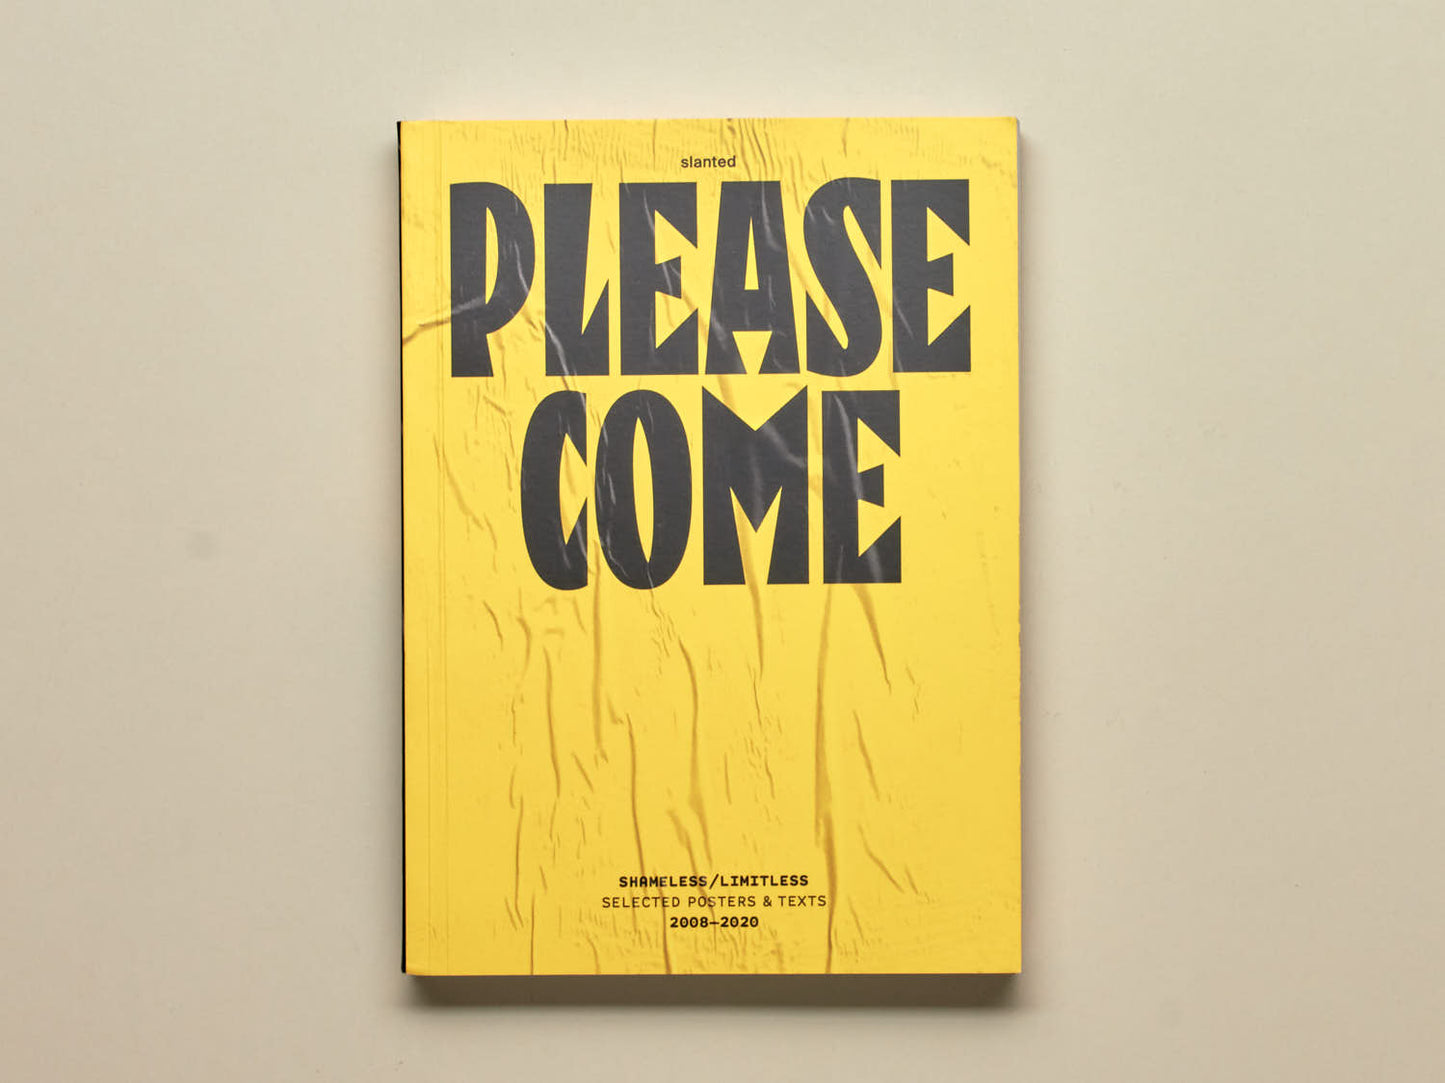 Kevin Halpin, Please Come: Shameless / Limitless—Selected Posters & Texts 2008–2020